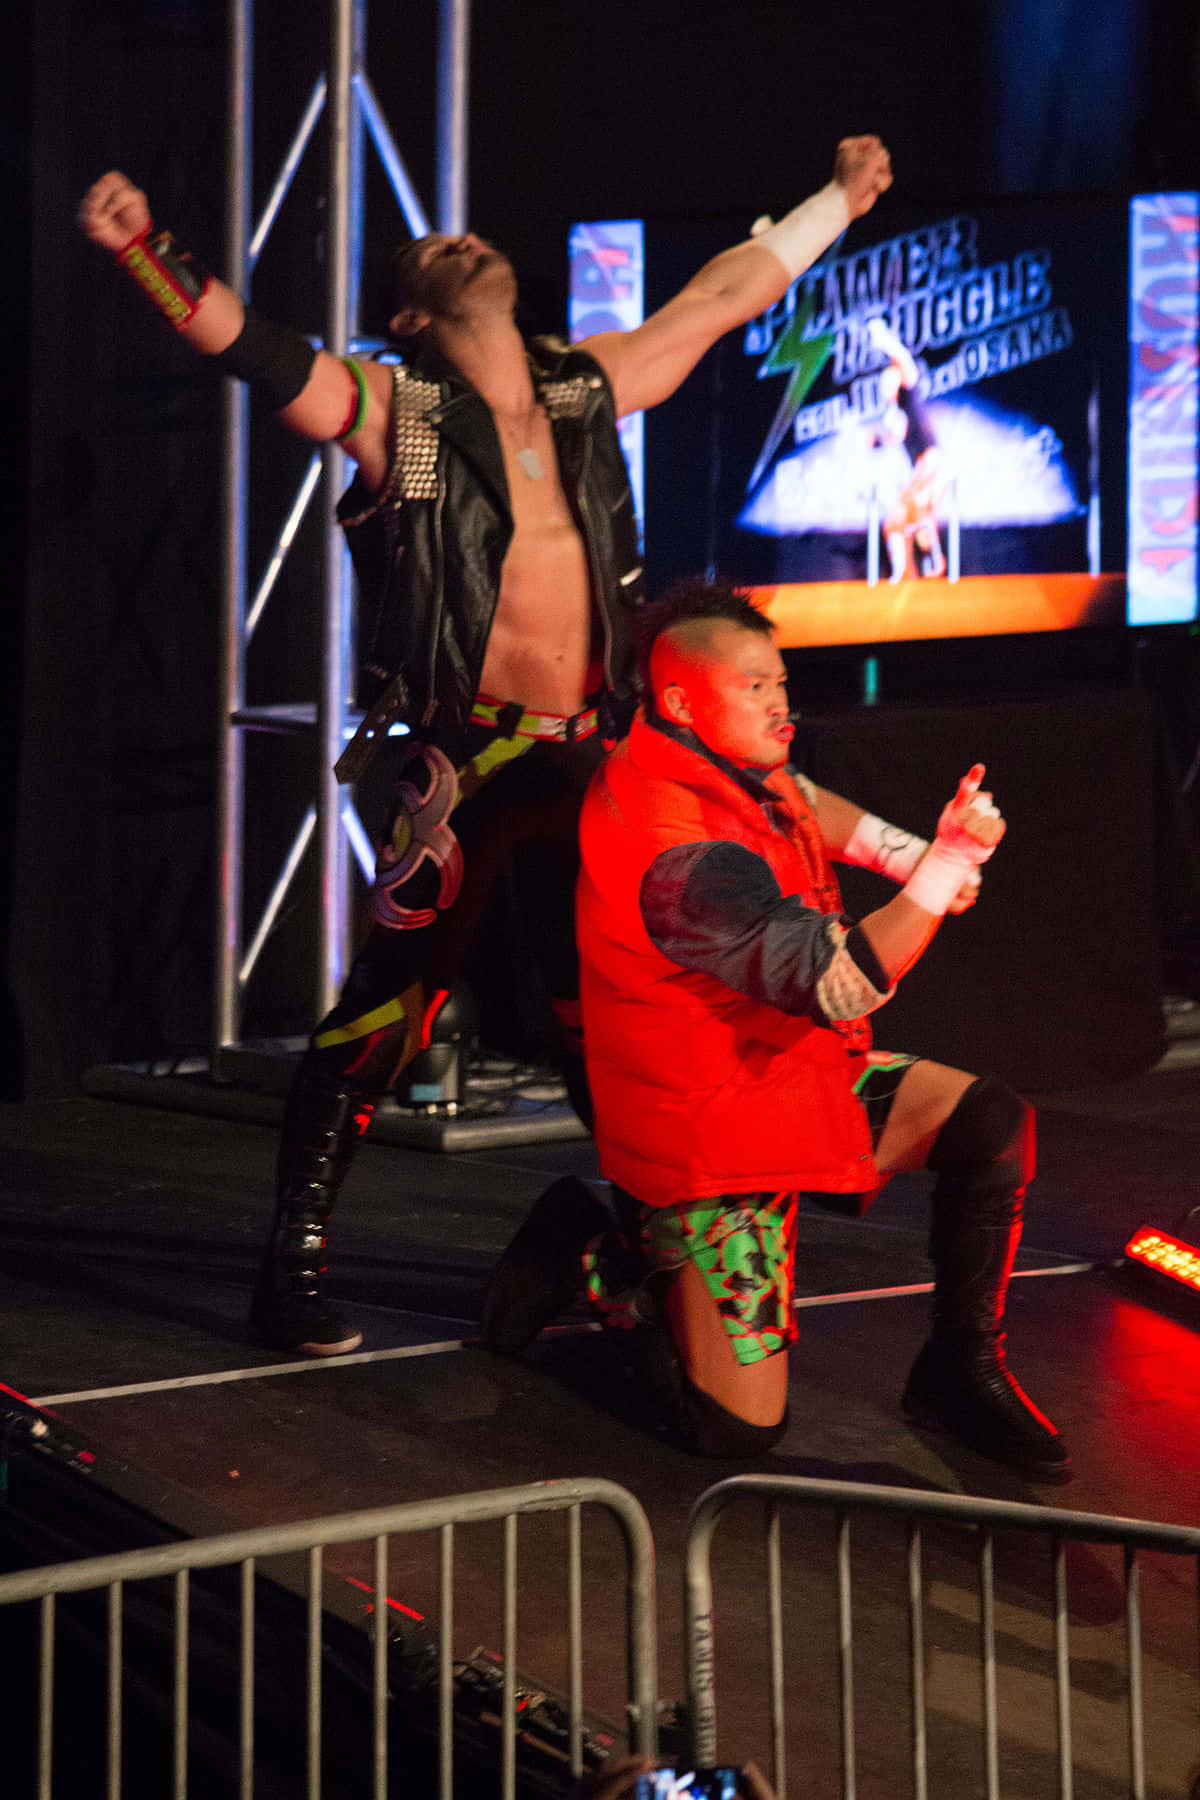 Professional Wrestler Alex Shelley Making an Entrance with Yujiro Kushida during the Dusty Classic Tournament Wallpaper